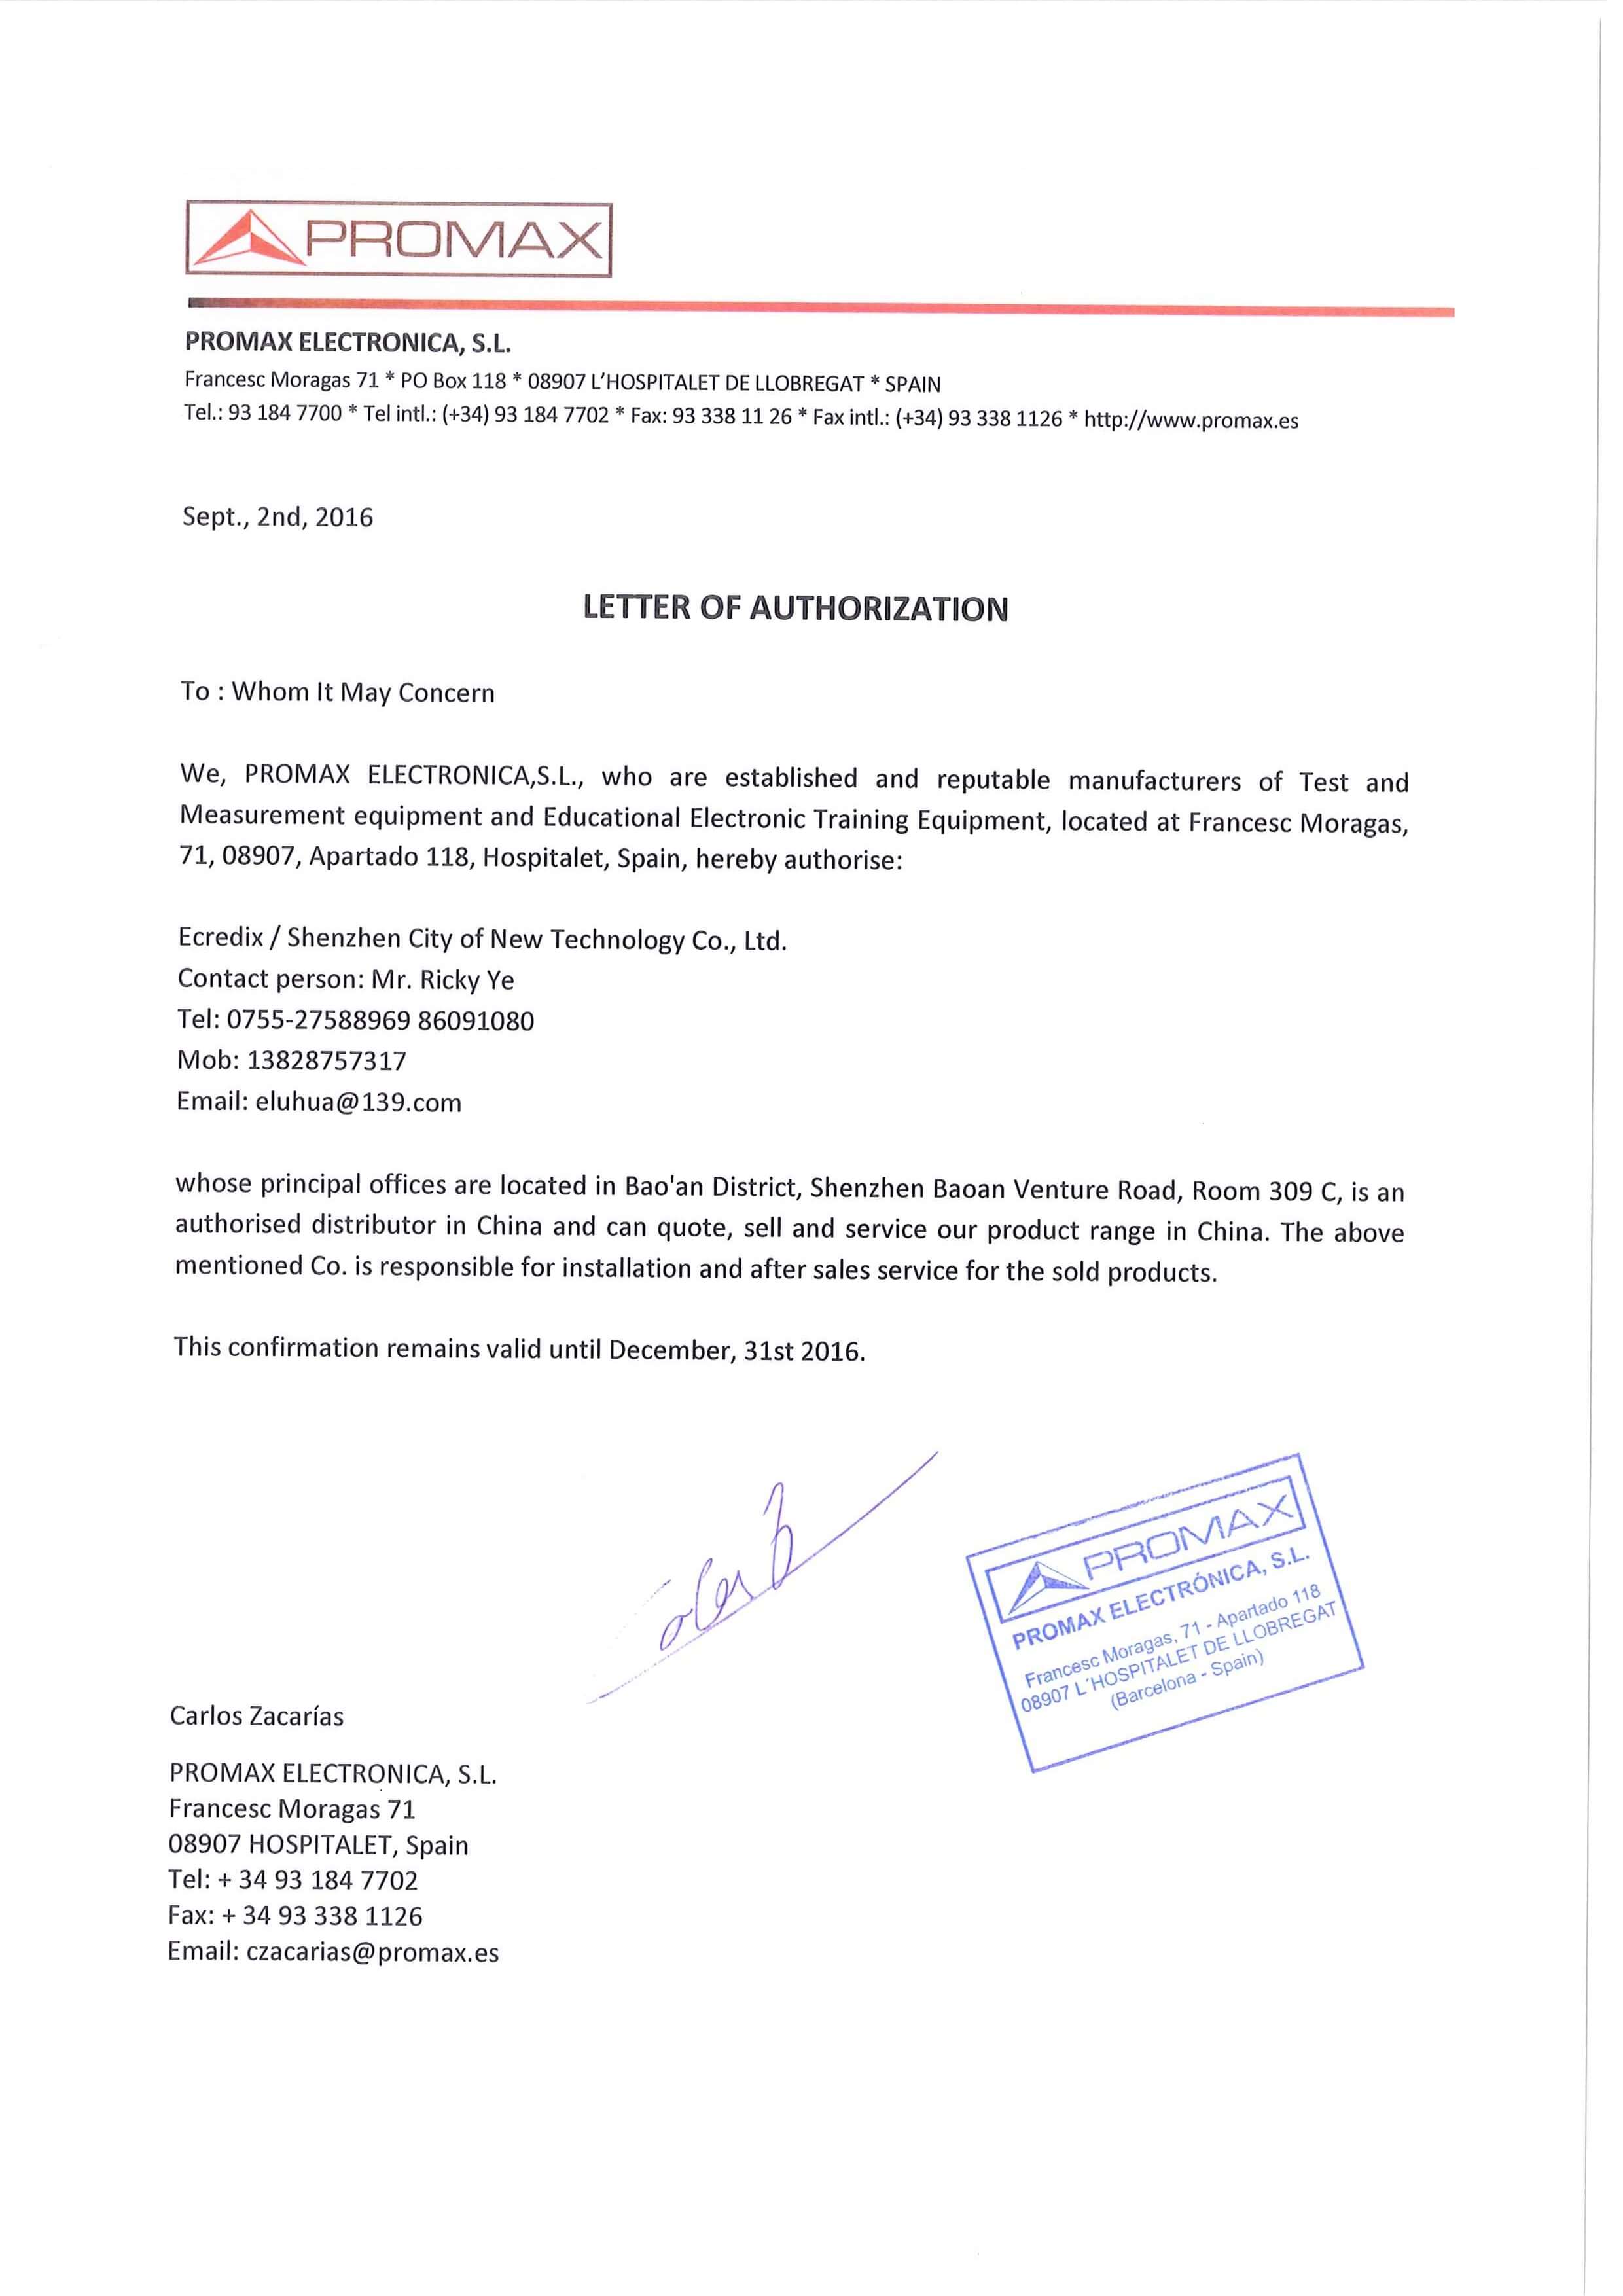 Promax Letter of Authorization